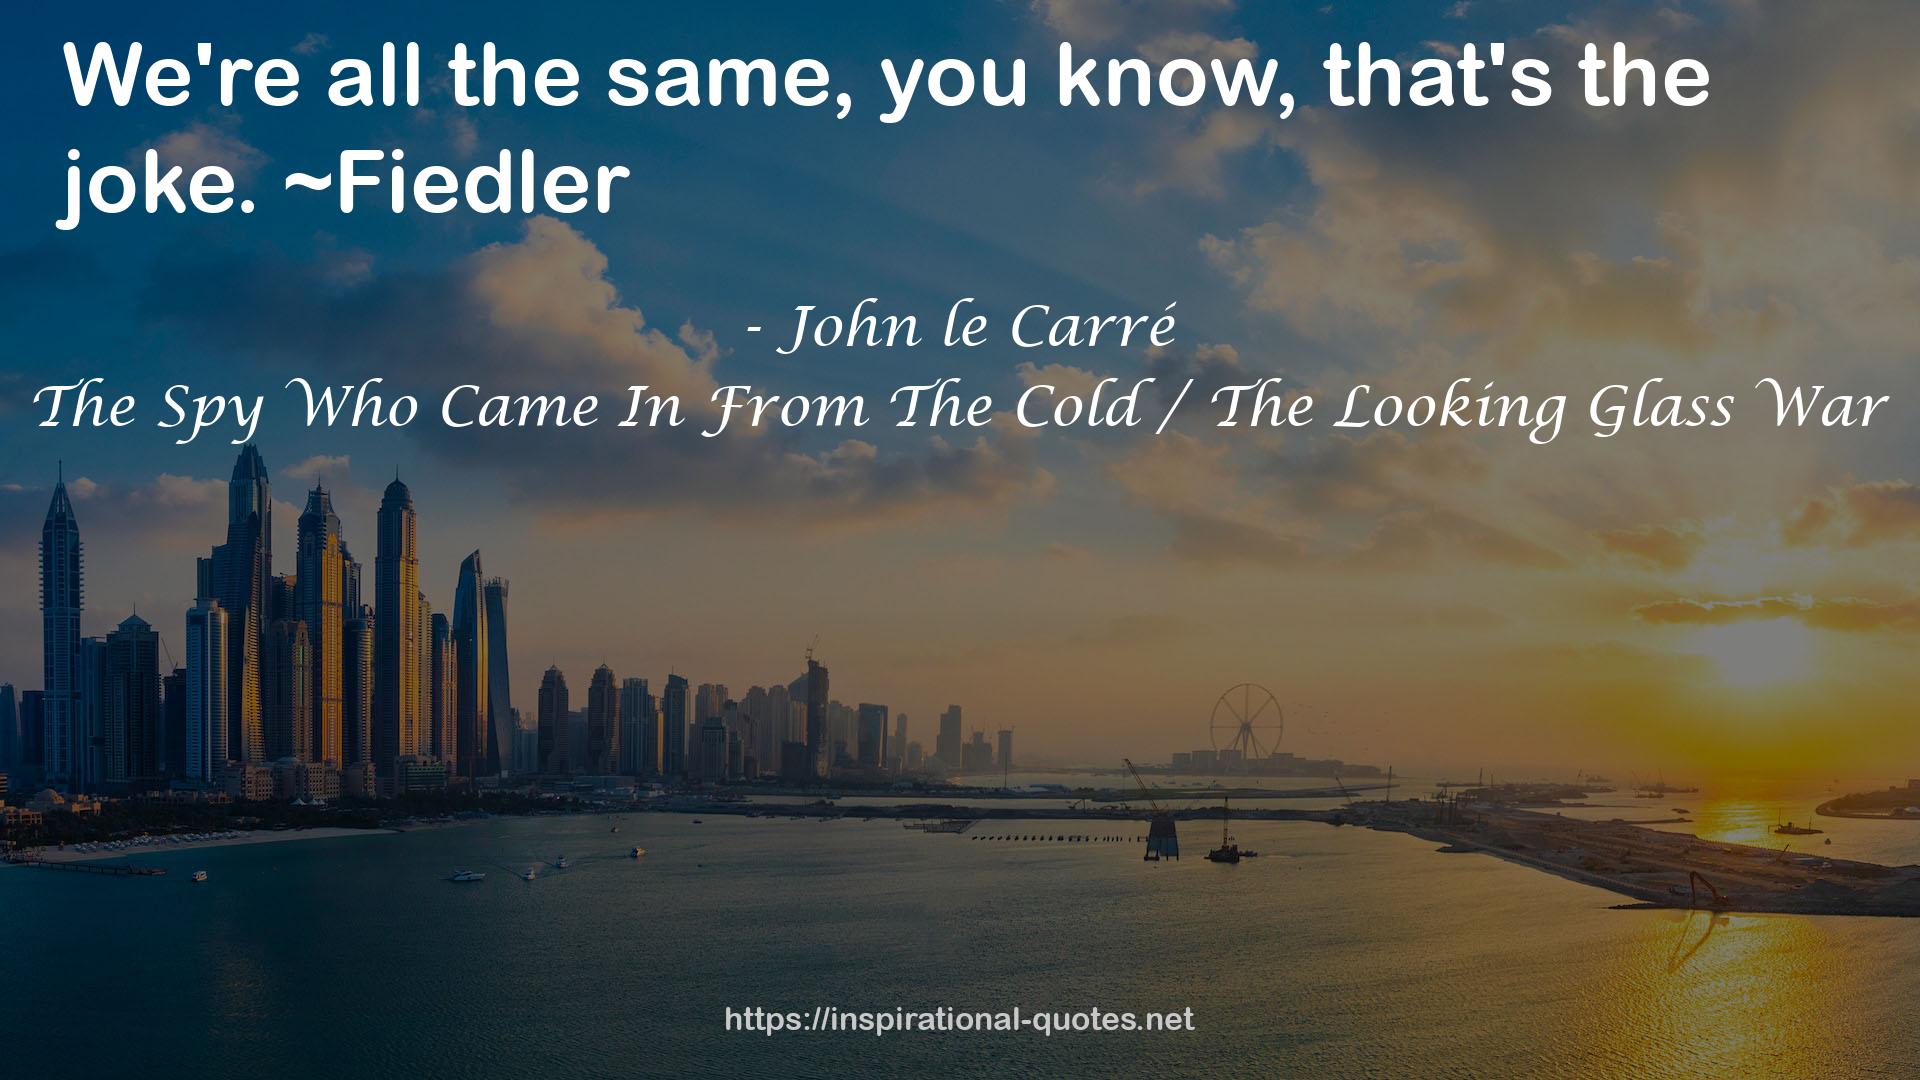 The Spy Who Came In From The Cold / The Looking Glass War QUOTES